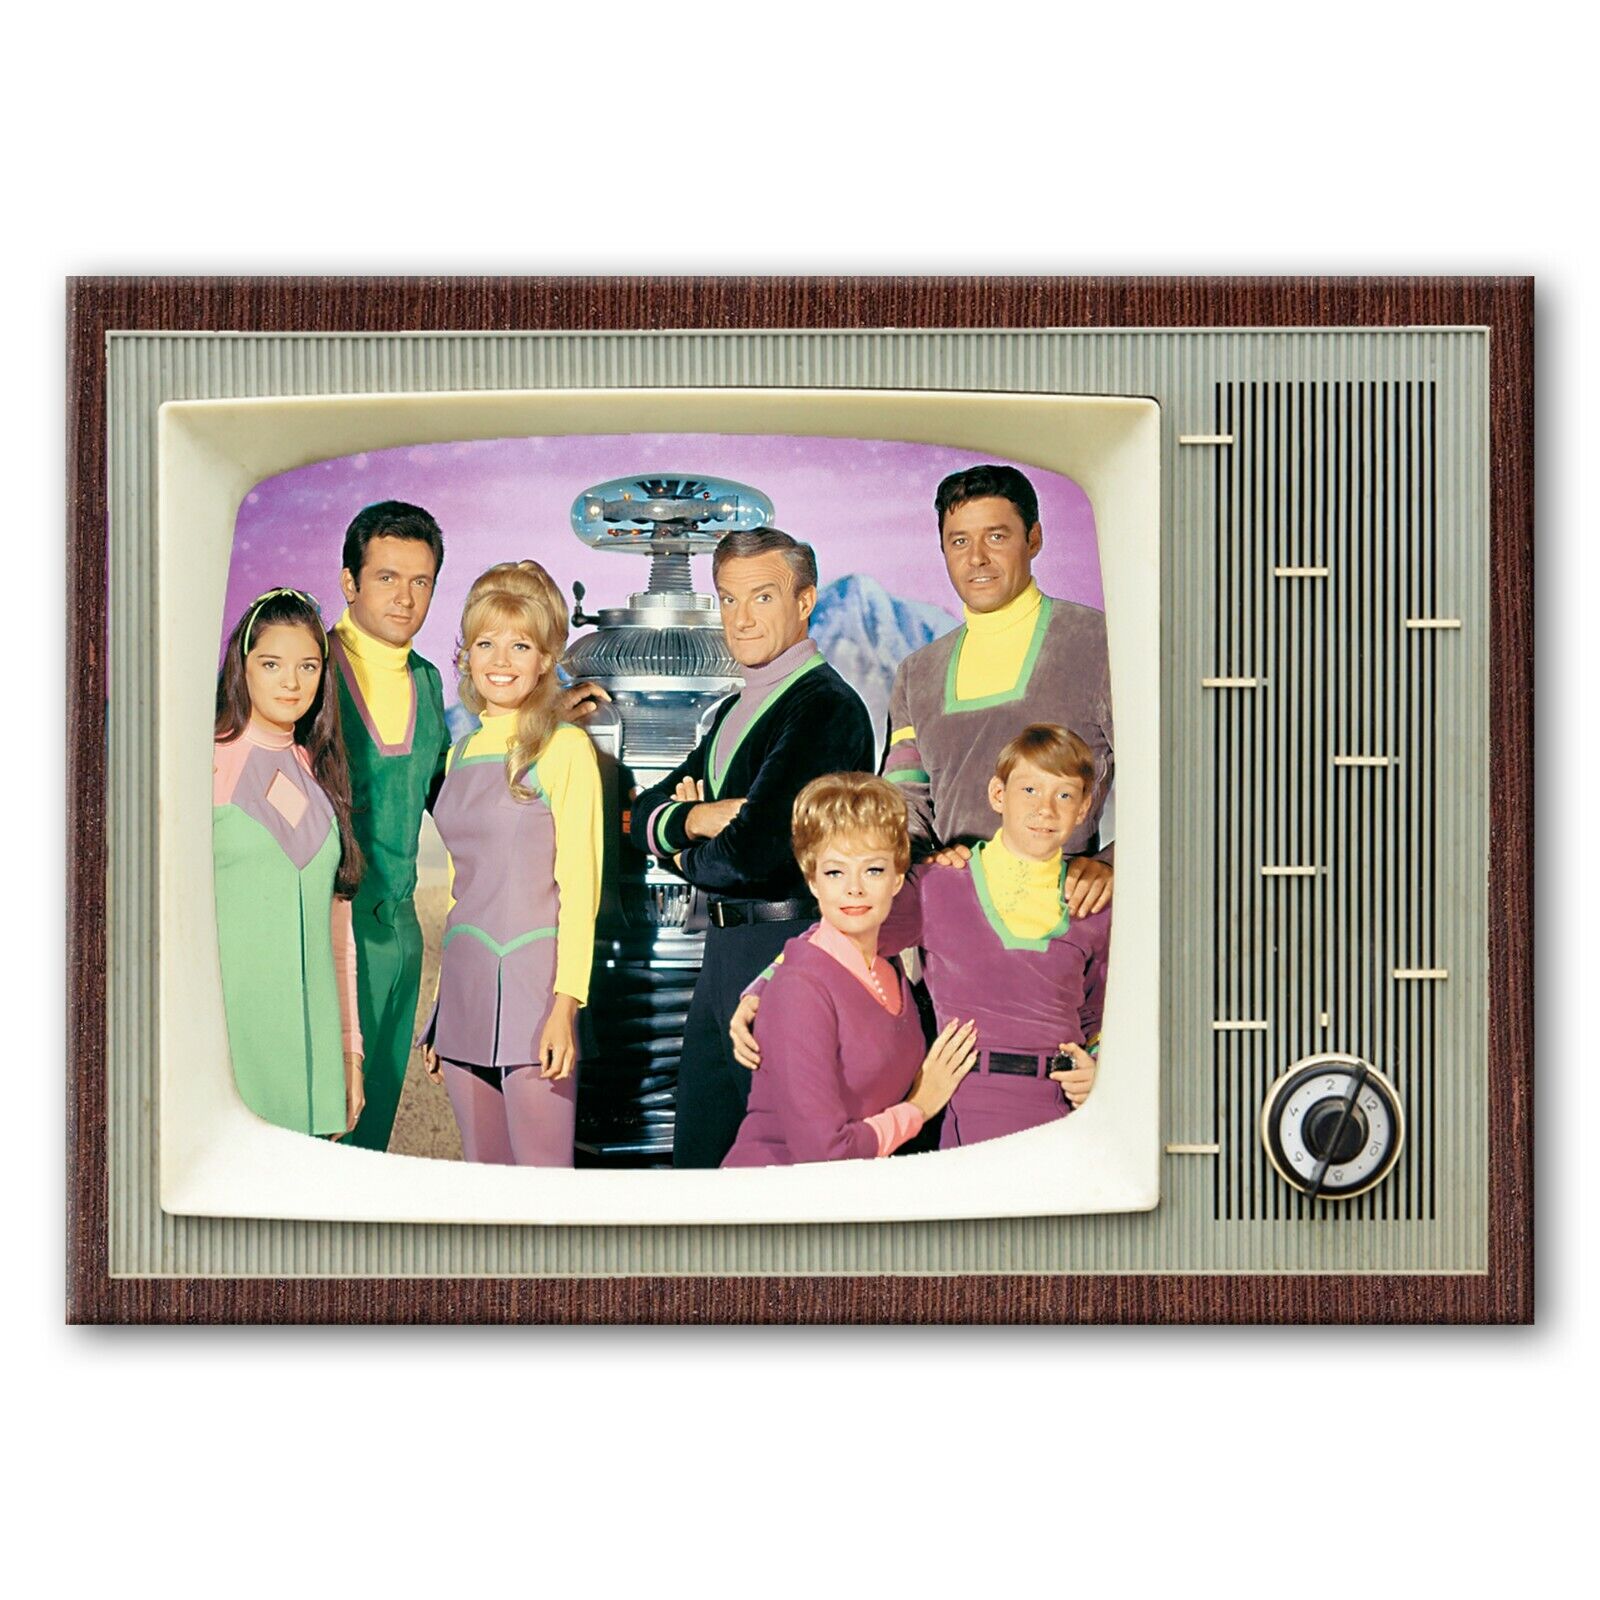 LOST IN SPACE TV Show Classic TV 3.5 inches x 2.5 inches Steel FRIDGE MAGNET